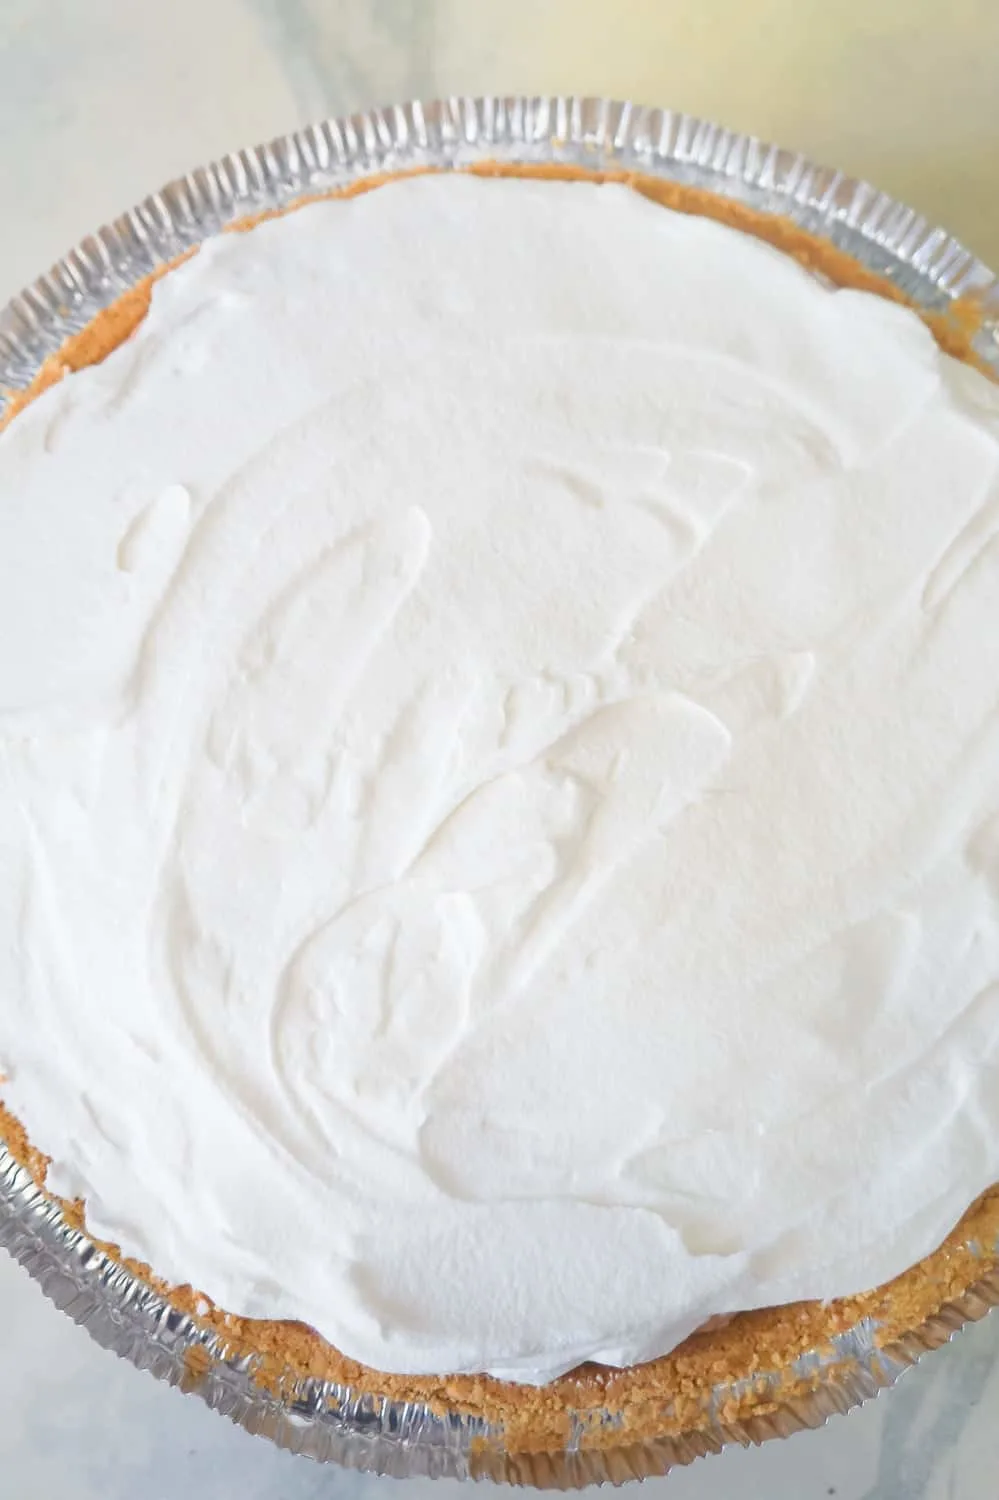 cool whip on top of no bake peanut butter cheesecake